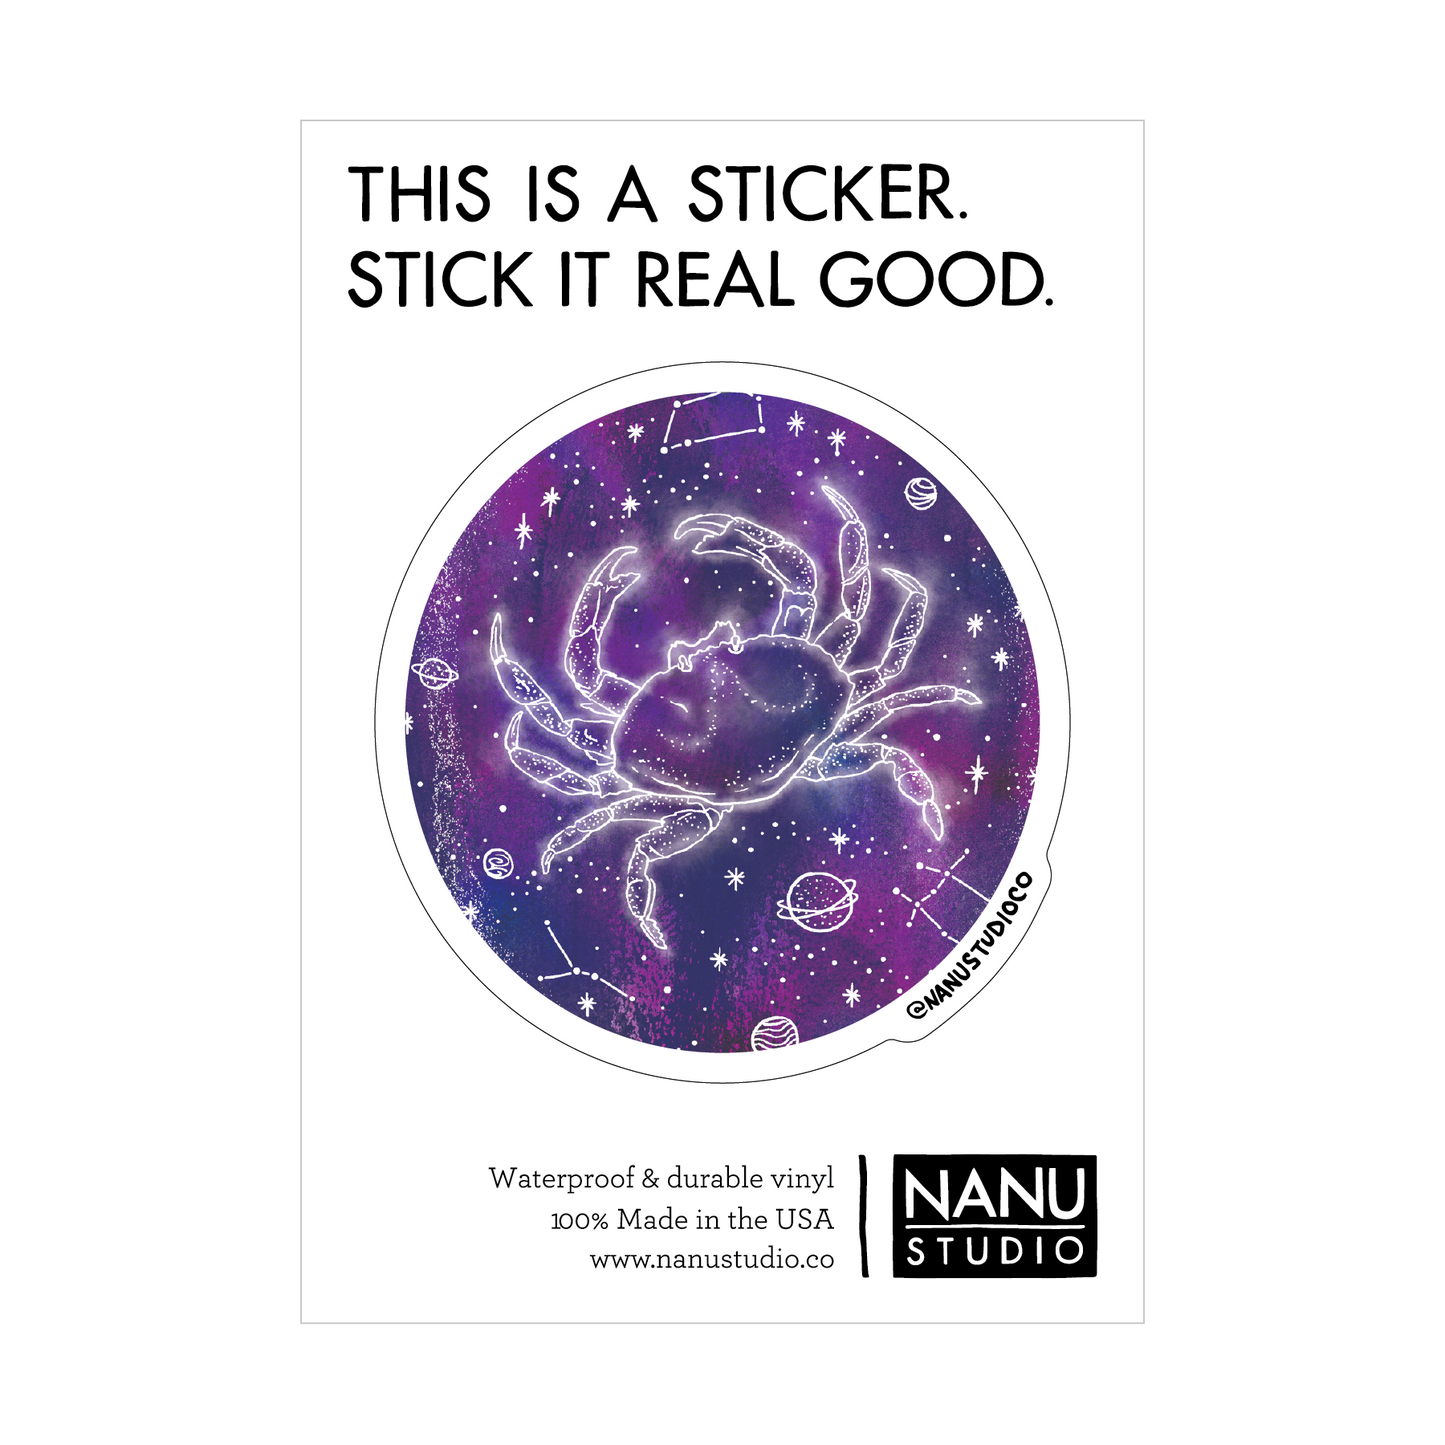 An illustrated sticker featuring a dark blue starlit background with an image of a crab in the centre which seems as though it's glowing, accompanied by three constellations: Cancer, Gemini and Leo